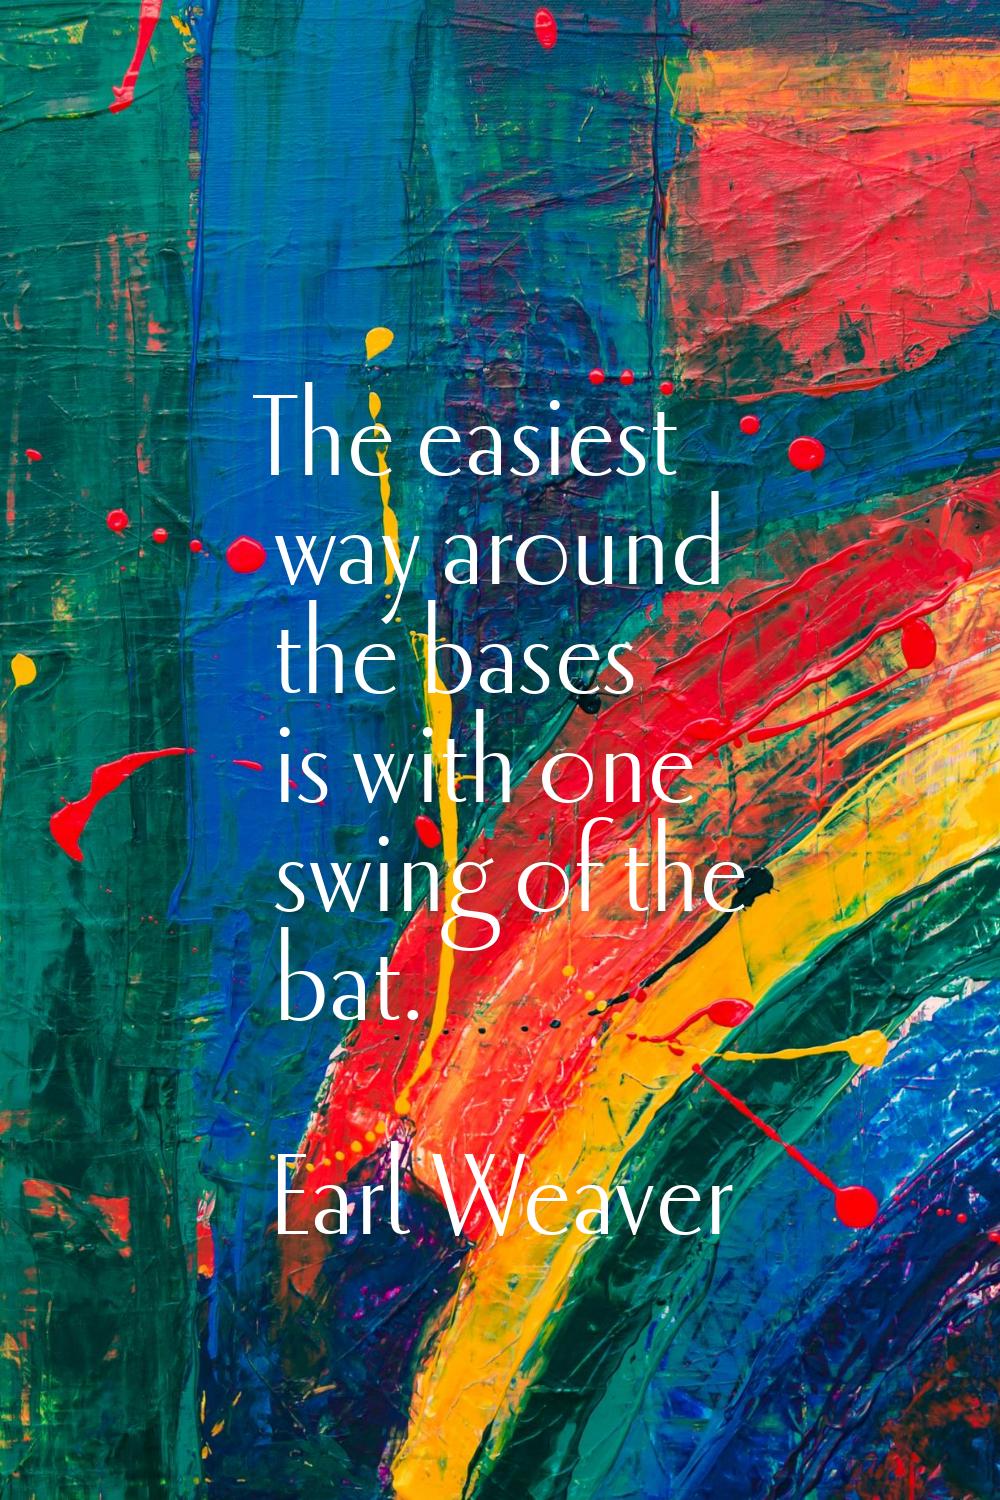 The easiest way around the bases is with one swing of the bat.